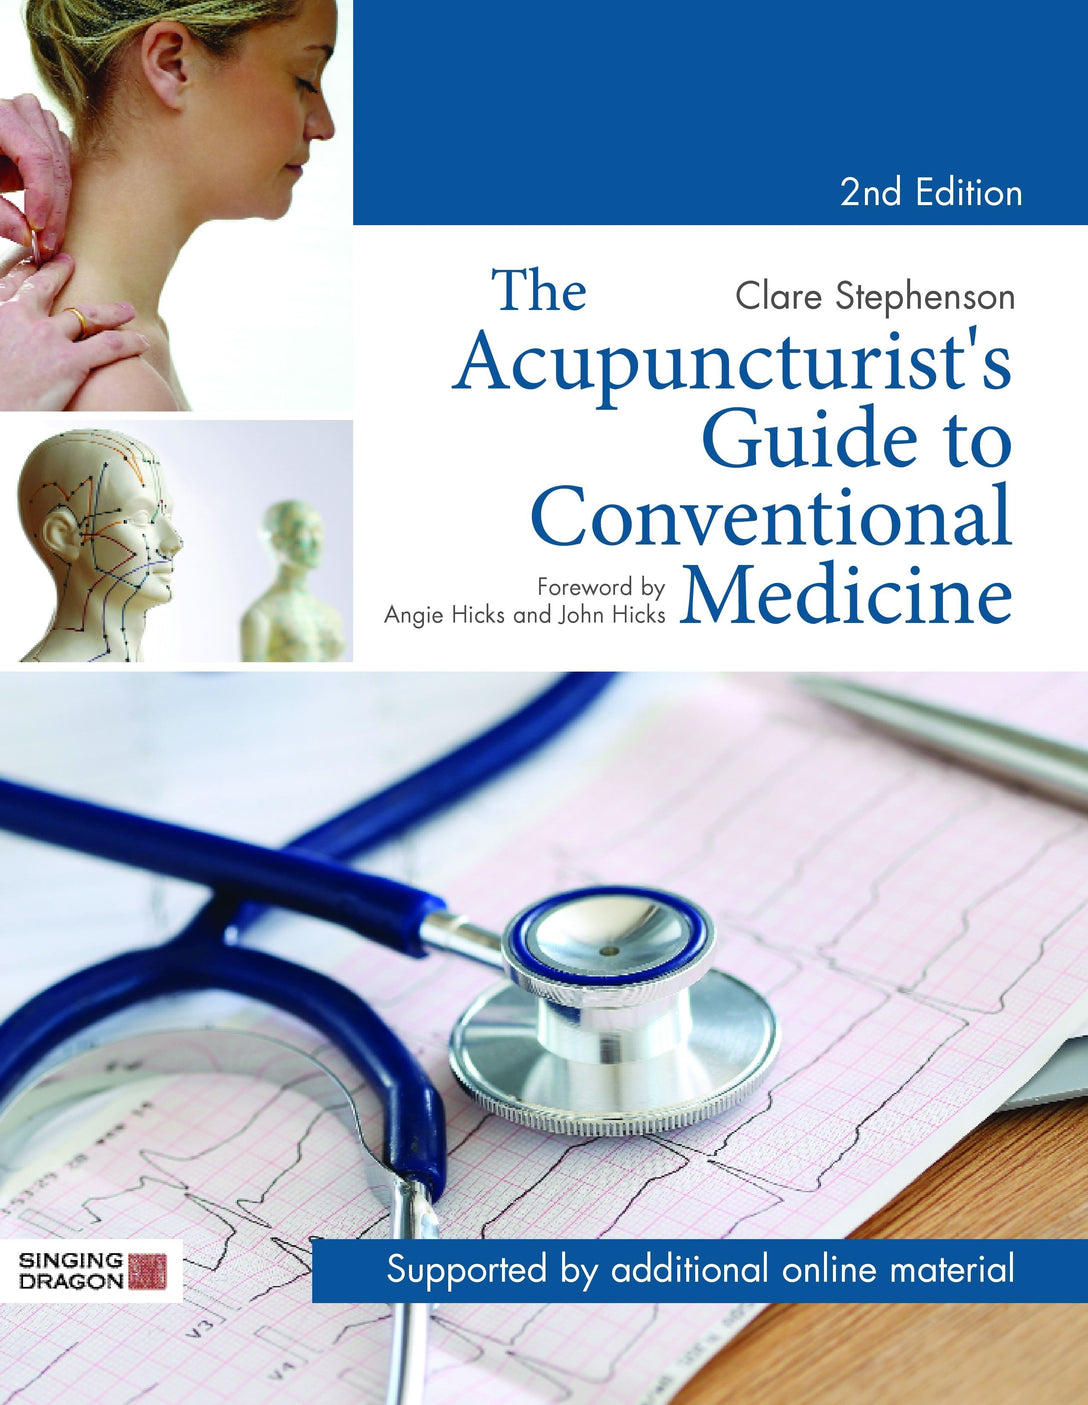 The Acupuncturist's Guide to Conventional Medicine, Second Edition by Clare Stephenson